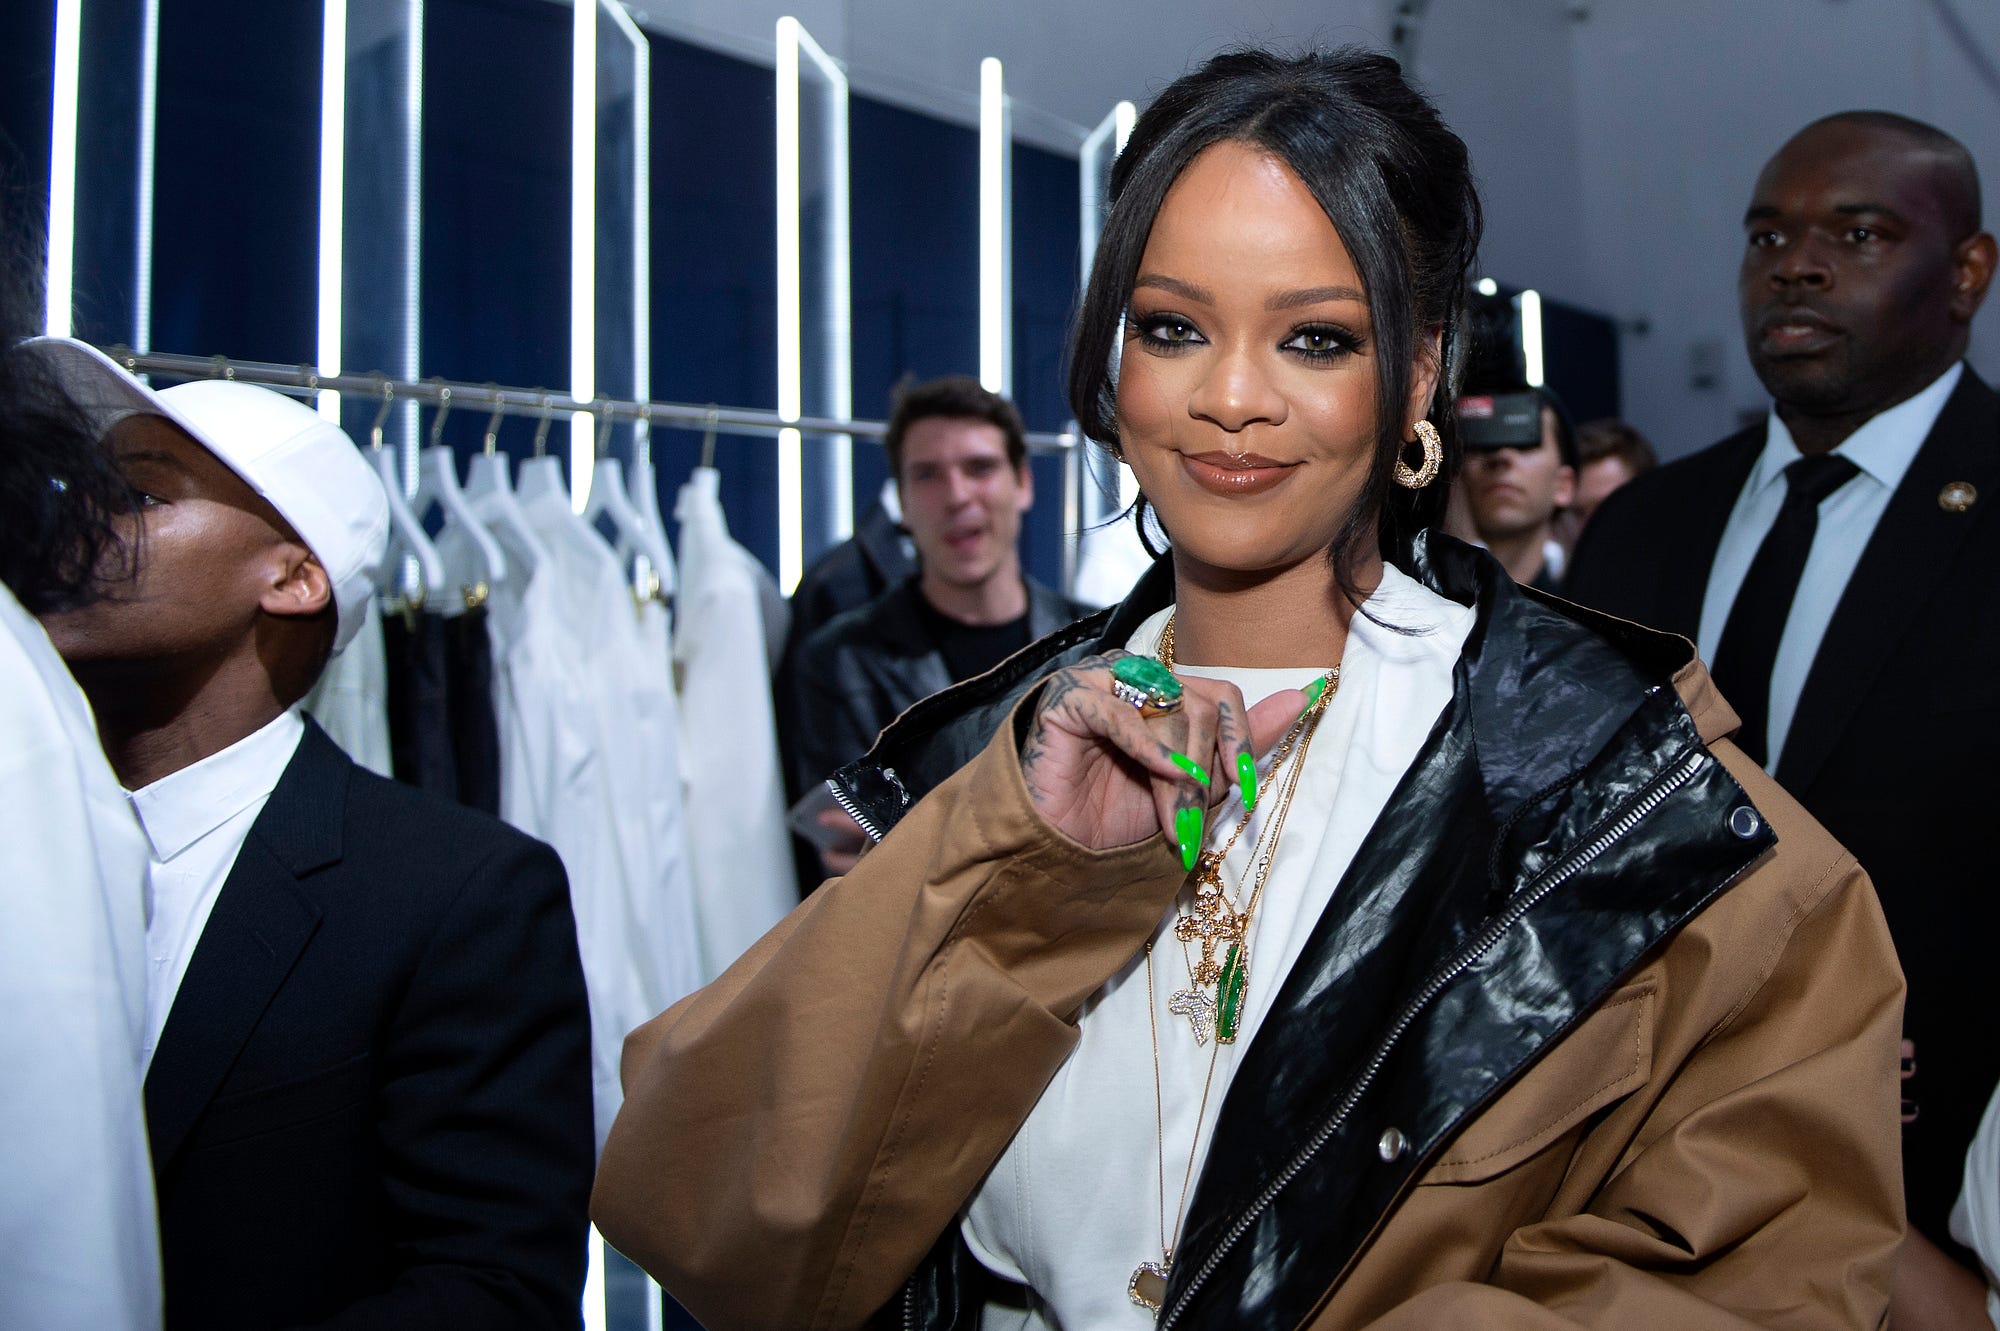 Rihanna's New Fenty Fashion Label Launch With LVMH: What You Need To Know &  Pictures, British Vogue